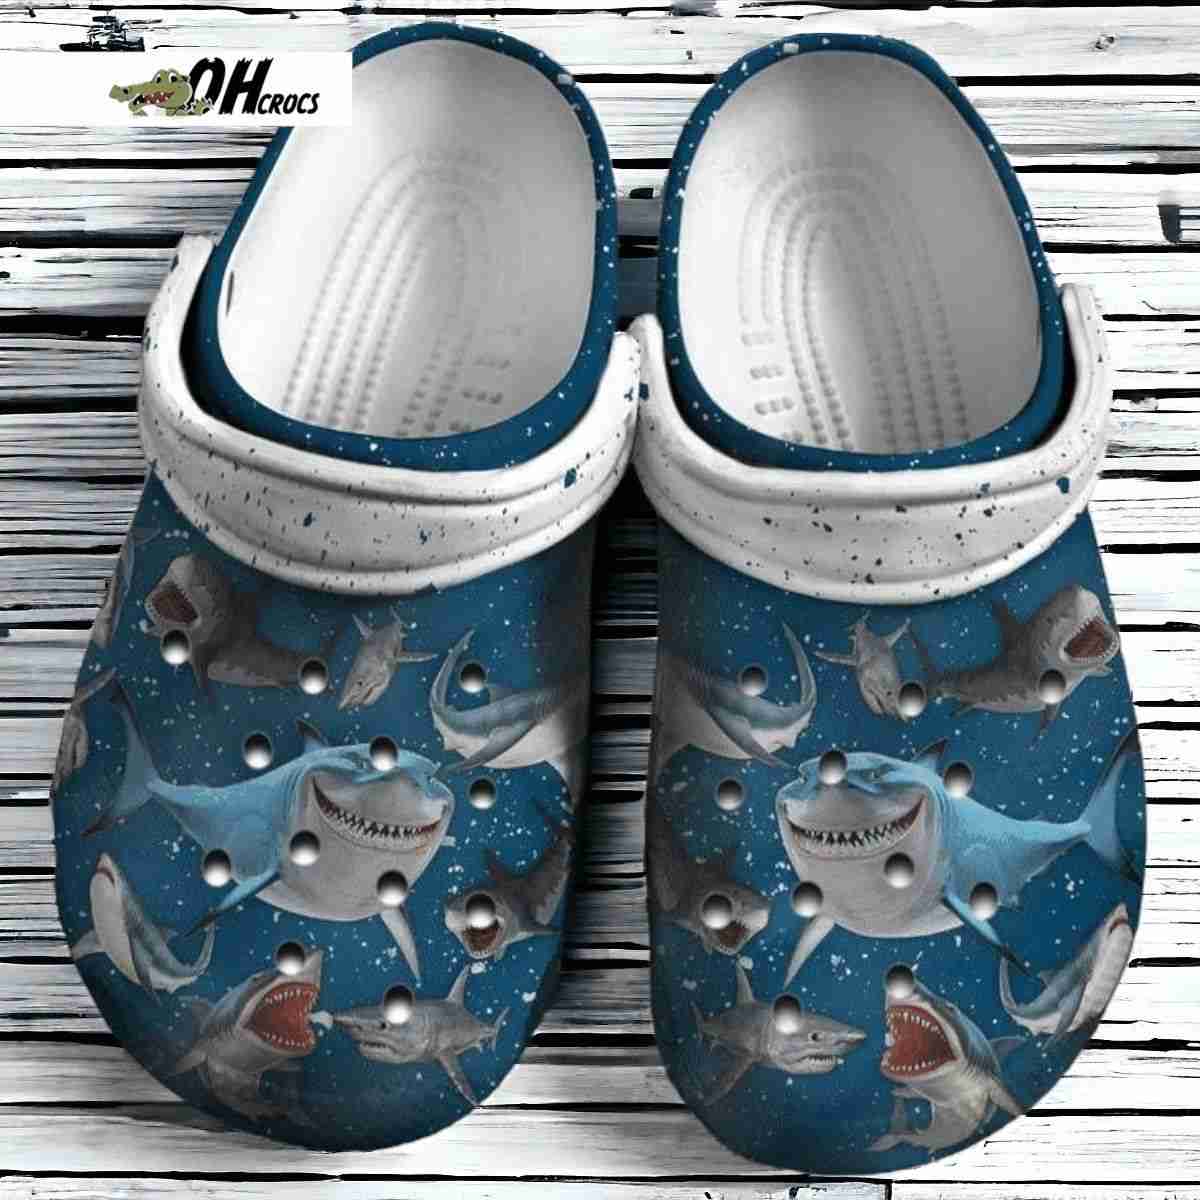 Best Gifts For Shark Lovers Crocs Classic Clogs Shoes Gift